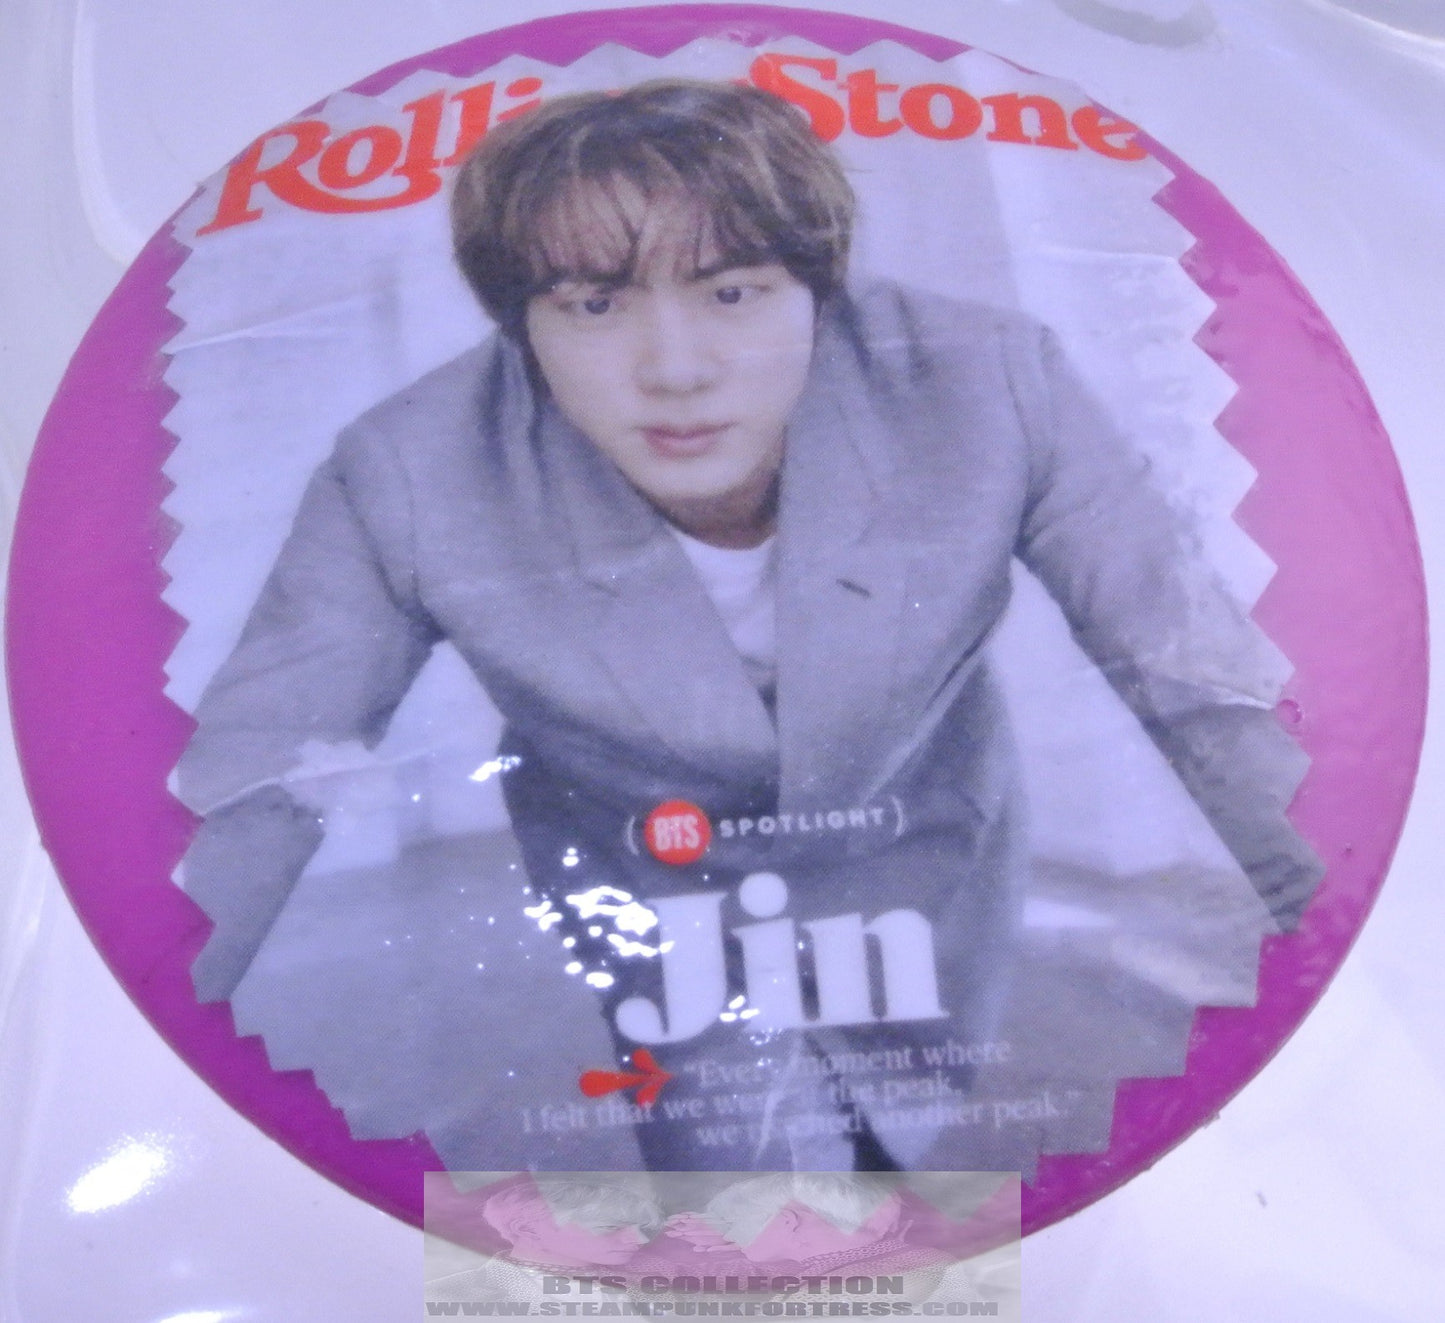 BTS KIM SEOKJIN JIN PINK 2 SIDED COMPACT MIRROR LIGHT UP ROLLING STONE COVER